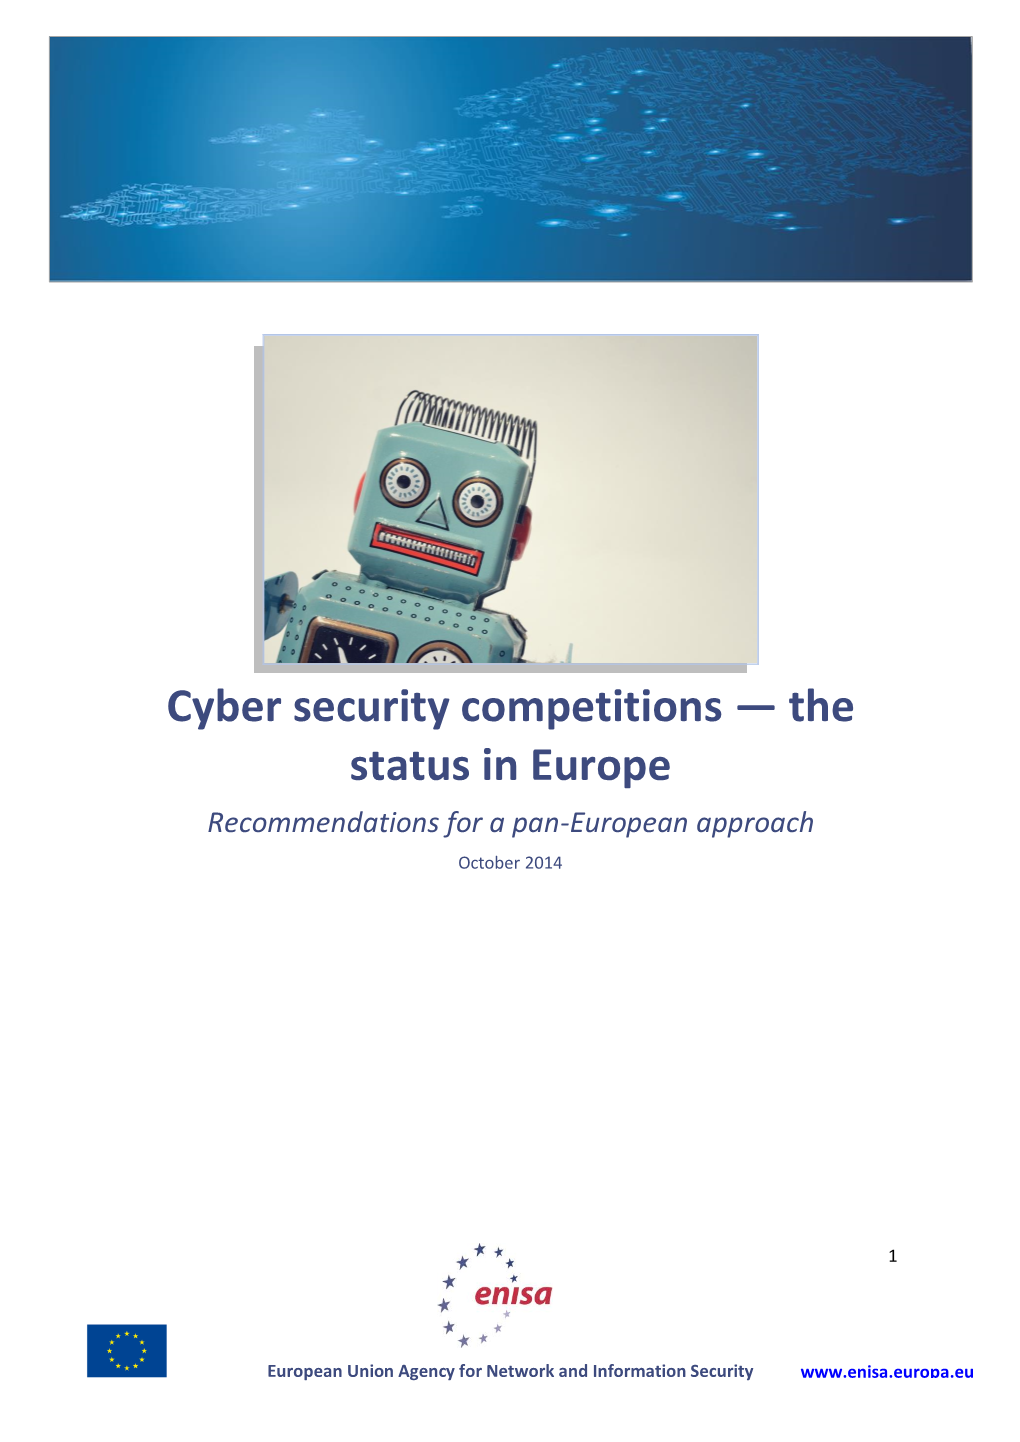 Cyber Challenge Competitions, Status in Europe